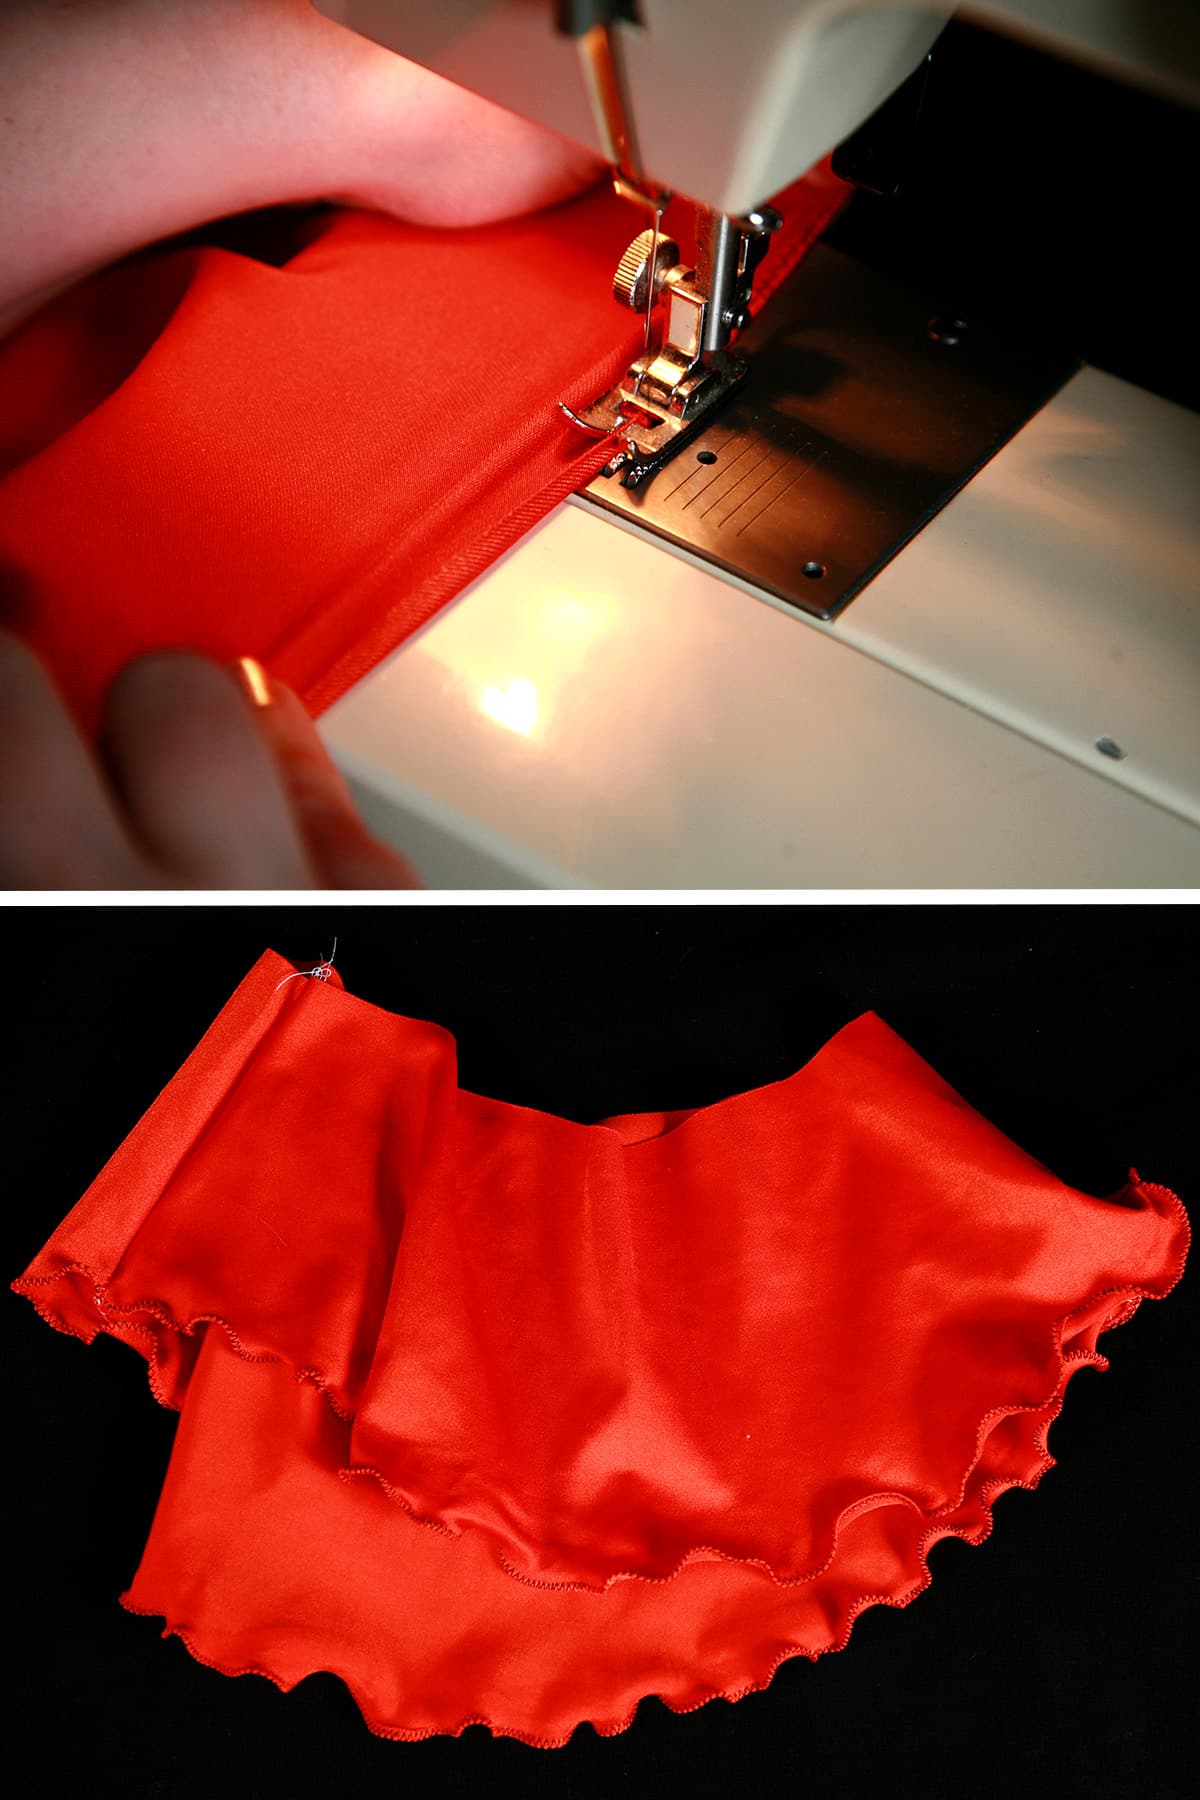 A two part image showing a lettuce edge zig zag hem being applied to an orange skating skirt.